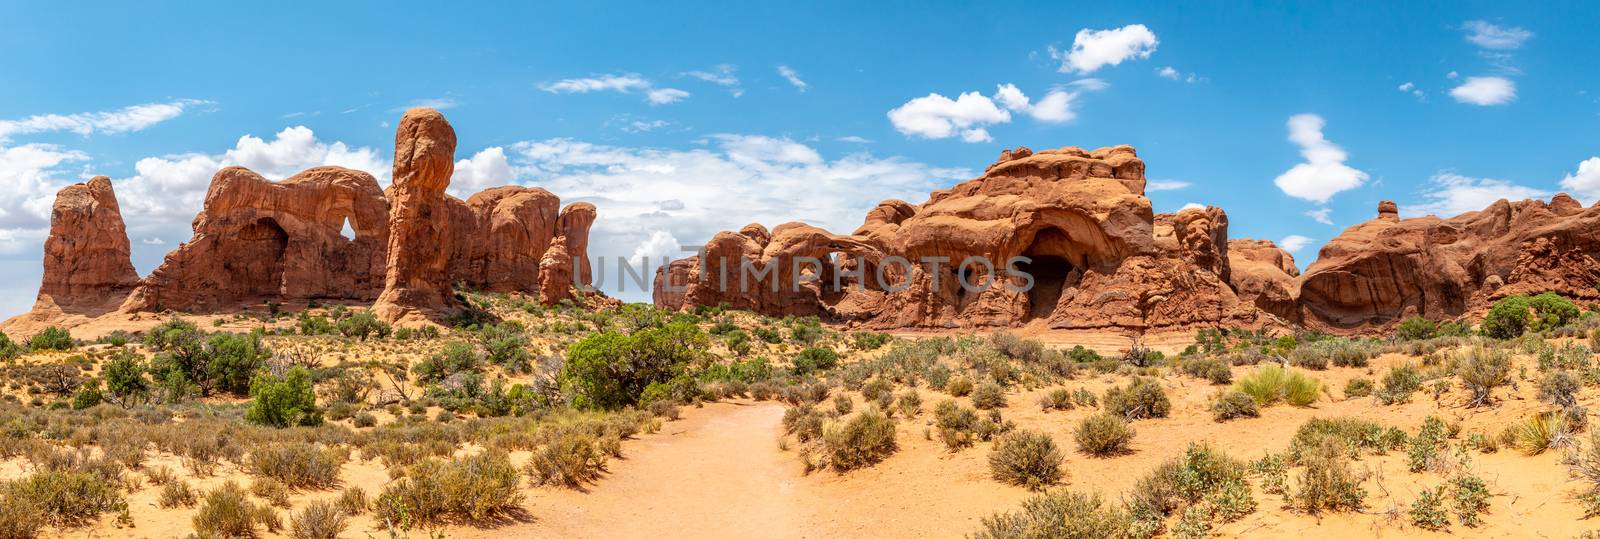 Panorama off Double Arch Trail in Arches National Park, Utah by Njean